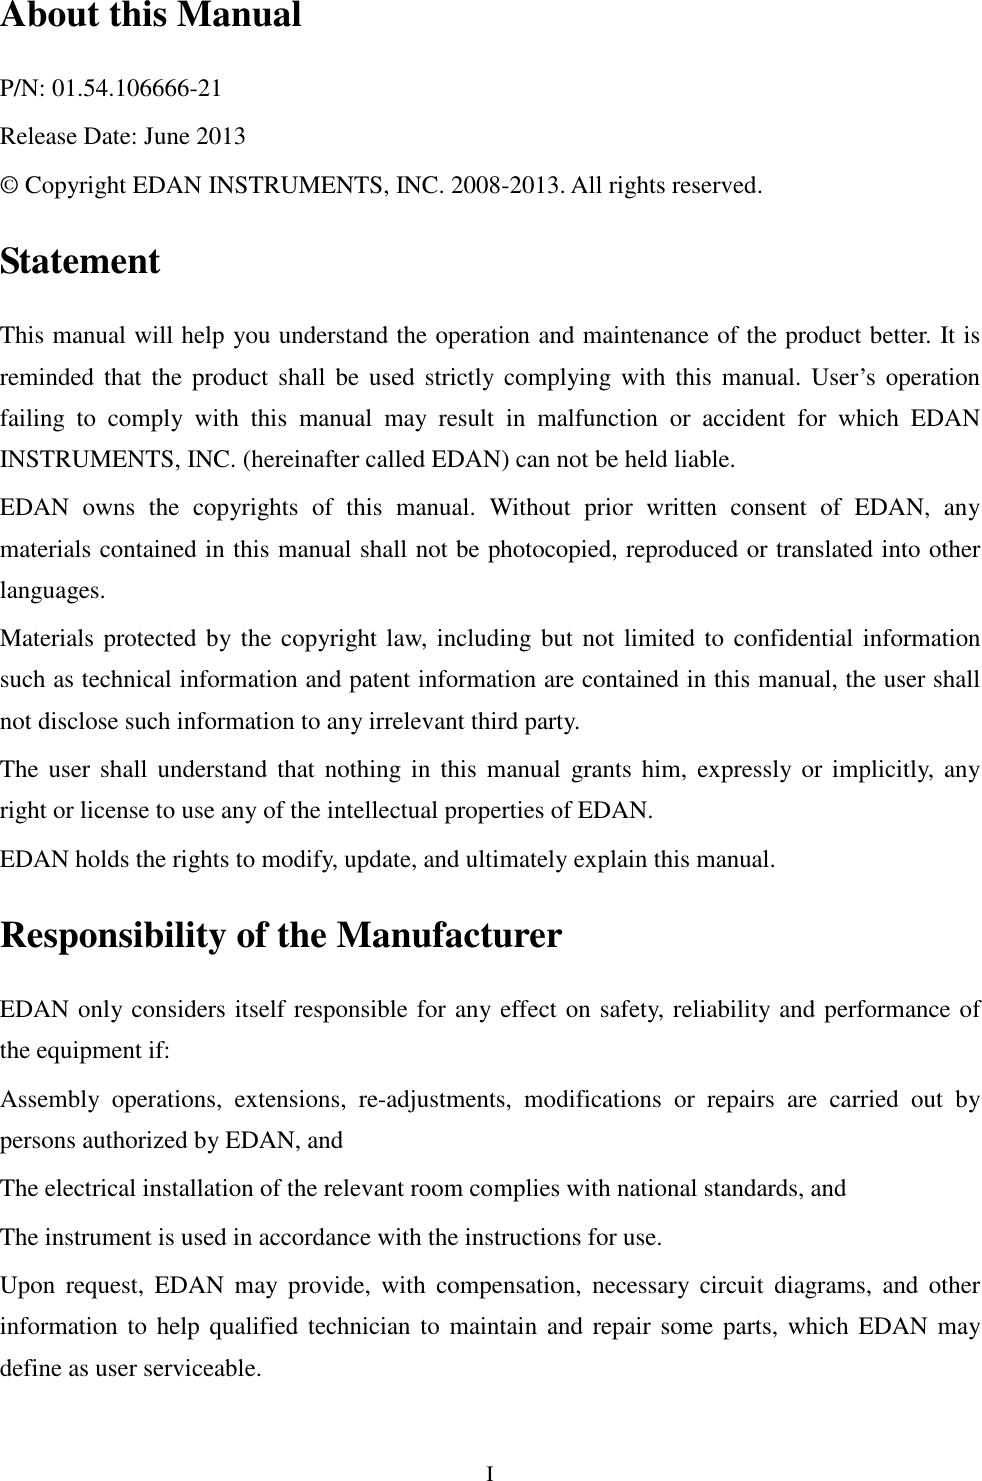  I About this Manual P/N: 01.54.106666-21 Release Date: June 2013 © Copyright EDAN INSTRUMENTS, INC. 2008-2013. All rights reserved. Statement This manual will help you understand the operation and maintenance of the product better. It is reminded that  the  product  shall  be  used  strictly complying with  this  manual.  User’s operation failing  to  comply  with  this  manual  may  result  in  malfunction  or  accident  for  which  EDAN INSTRUMENTS, INC. (hereinafter called EDAN) can not be held liable. EDAN  owns  the  copyrights  of  this  manual.  Without  prior  written  consent  of  EDAN,  any materials contained in this manual shall not be photocopied, reproduced or translated into other languages. Materials protected by the copyright law, including but not limited to confidential information such as technical information and patent information are contained in this manual, the user shall not disclose such information to any irrelevant third party. The user shall  understand  that  nothing  in  this  manual  grants him,  expressly or implicitly, any right or license to use any of the intellectual properties of EDAN. EDAN holds the rights to modify, update, and ultimately explain this manual. Responsibility of the Manufacturer EDAN only considers itself responsible for any effect on safety, reliability and performance of the equipment if: Assembly  operations,  extensions,  re-adjustments,  modifications  or  repairs  are  carried  out  by persons authorized by EDAN, and   The electrical installation of the relevant room complies with national standards, and   The instrument is used in accordance with the instructions for use. Upon  request,  EDAN  may  provide,  with  compensation,  necessary  circuit  diagrams,  and  other information to help qualified technician to maintain and repair some parts, which EDAN  may define as user serviceable. 